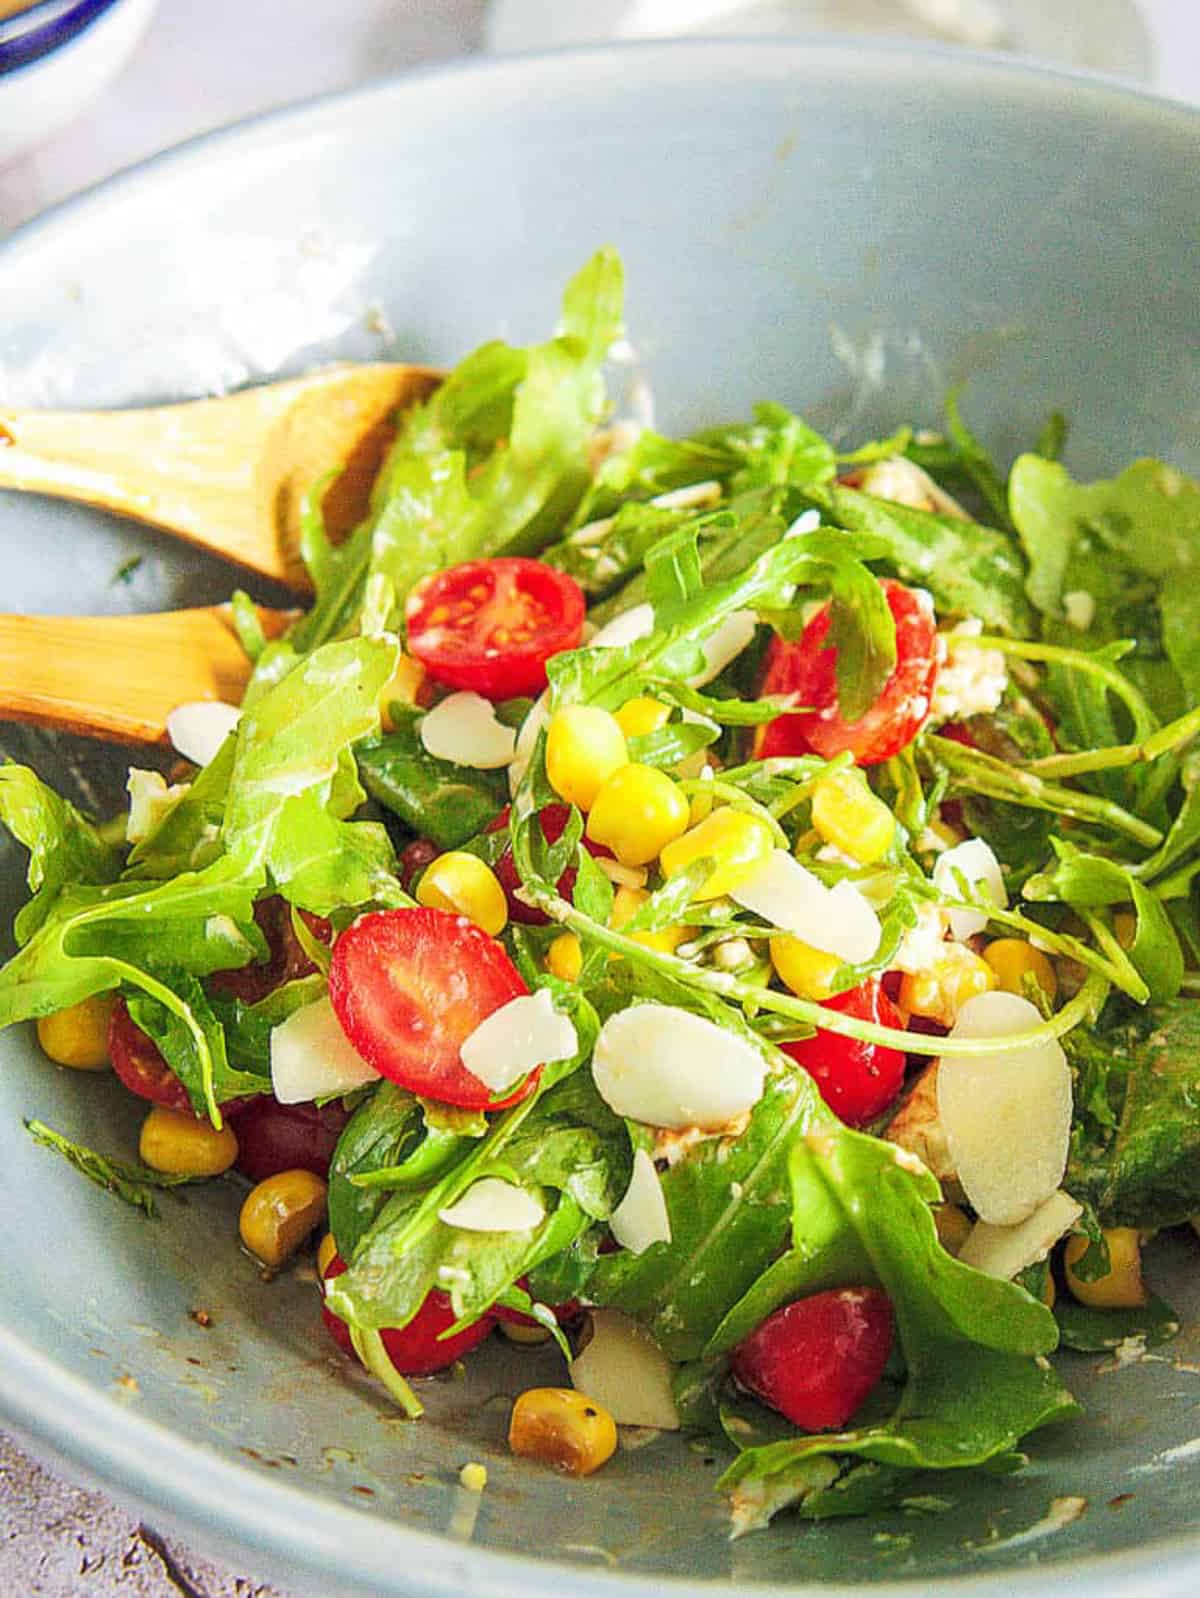 spinach and arugula salad with Tomatoes and Goat Cheese served in a light blue salad bowl